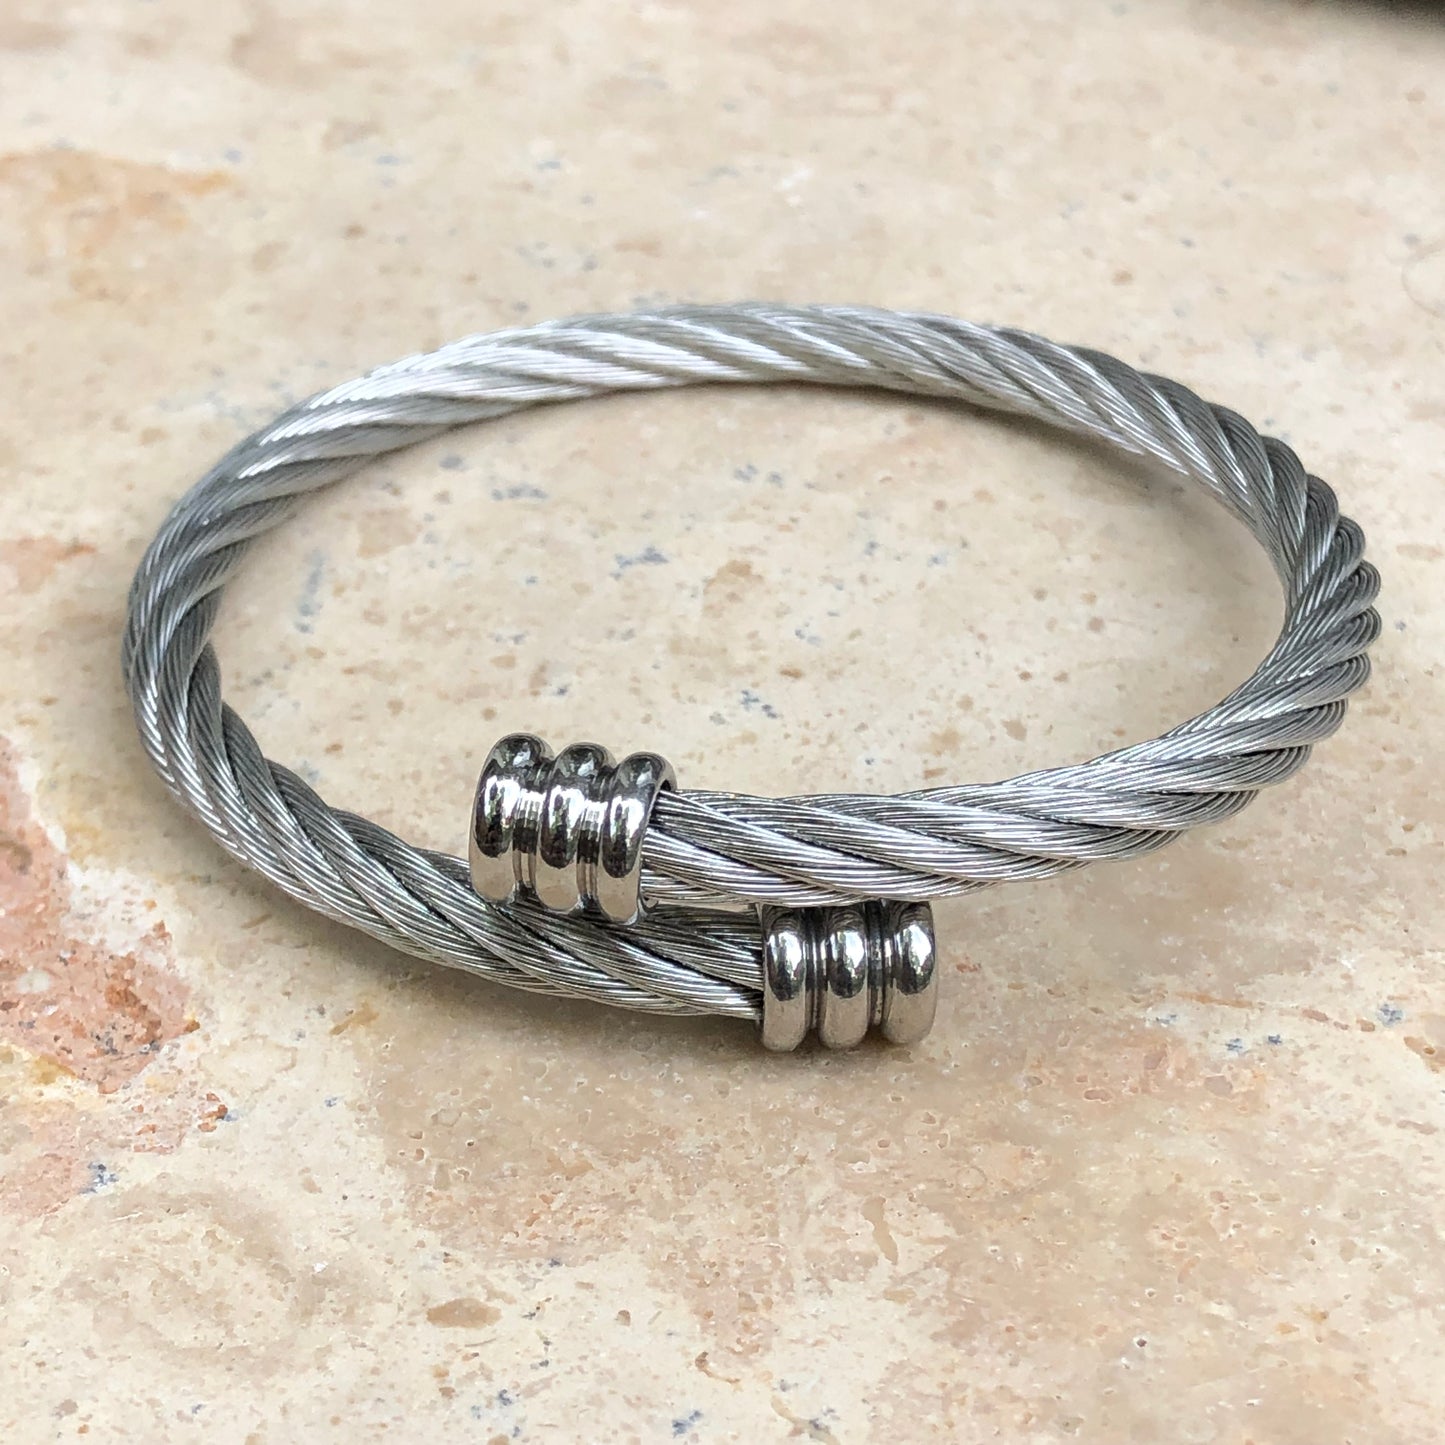 Stainless Steel Cable Twist Bangle Cuff Bracelet, Stainless Steel Cable Twist Bangle Cuff Bracelet - Legacy Saint Jewelry